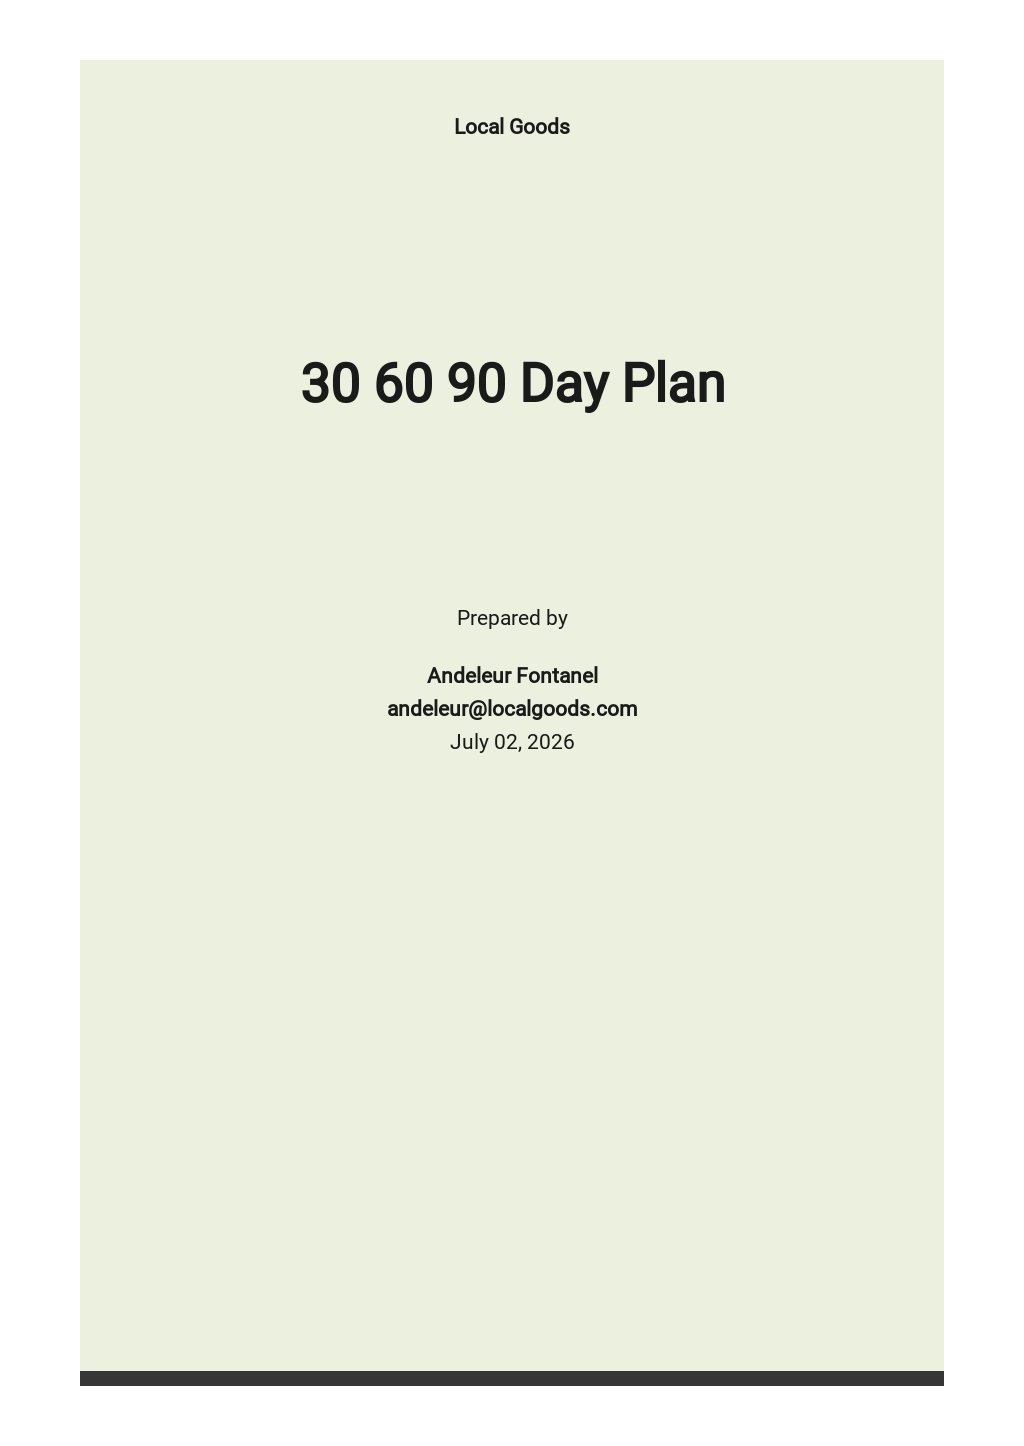 Free 21 21 21 Day Plan Templates, 21+ Download in Word, Pages In 30 60 90 Day Plan Template Word